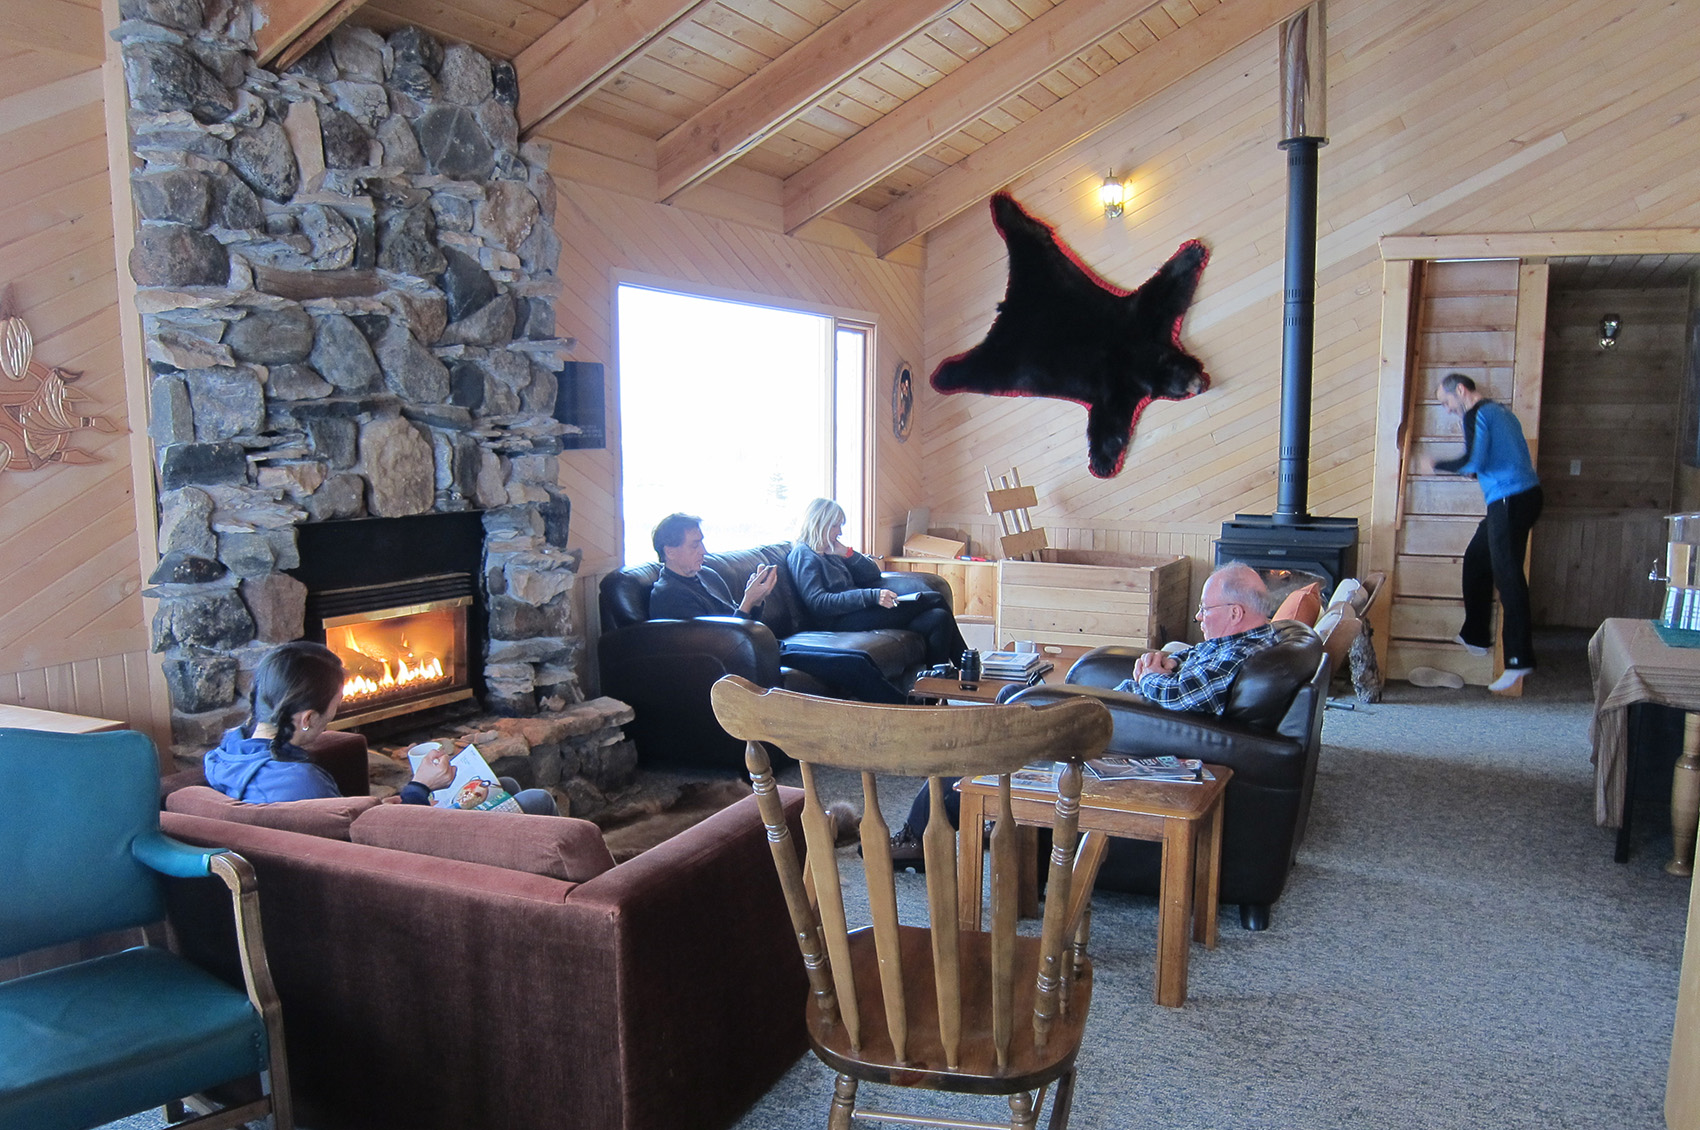 Guest relaxing at Dymond Lake Ecolodge. Margaret Brandes photo.